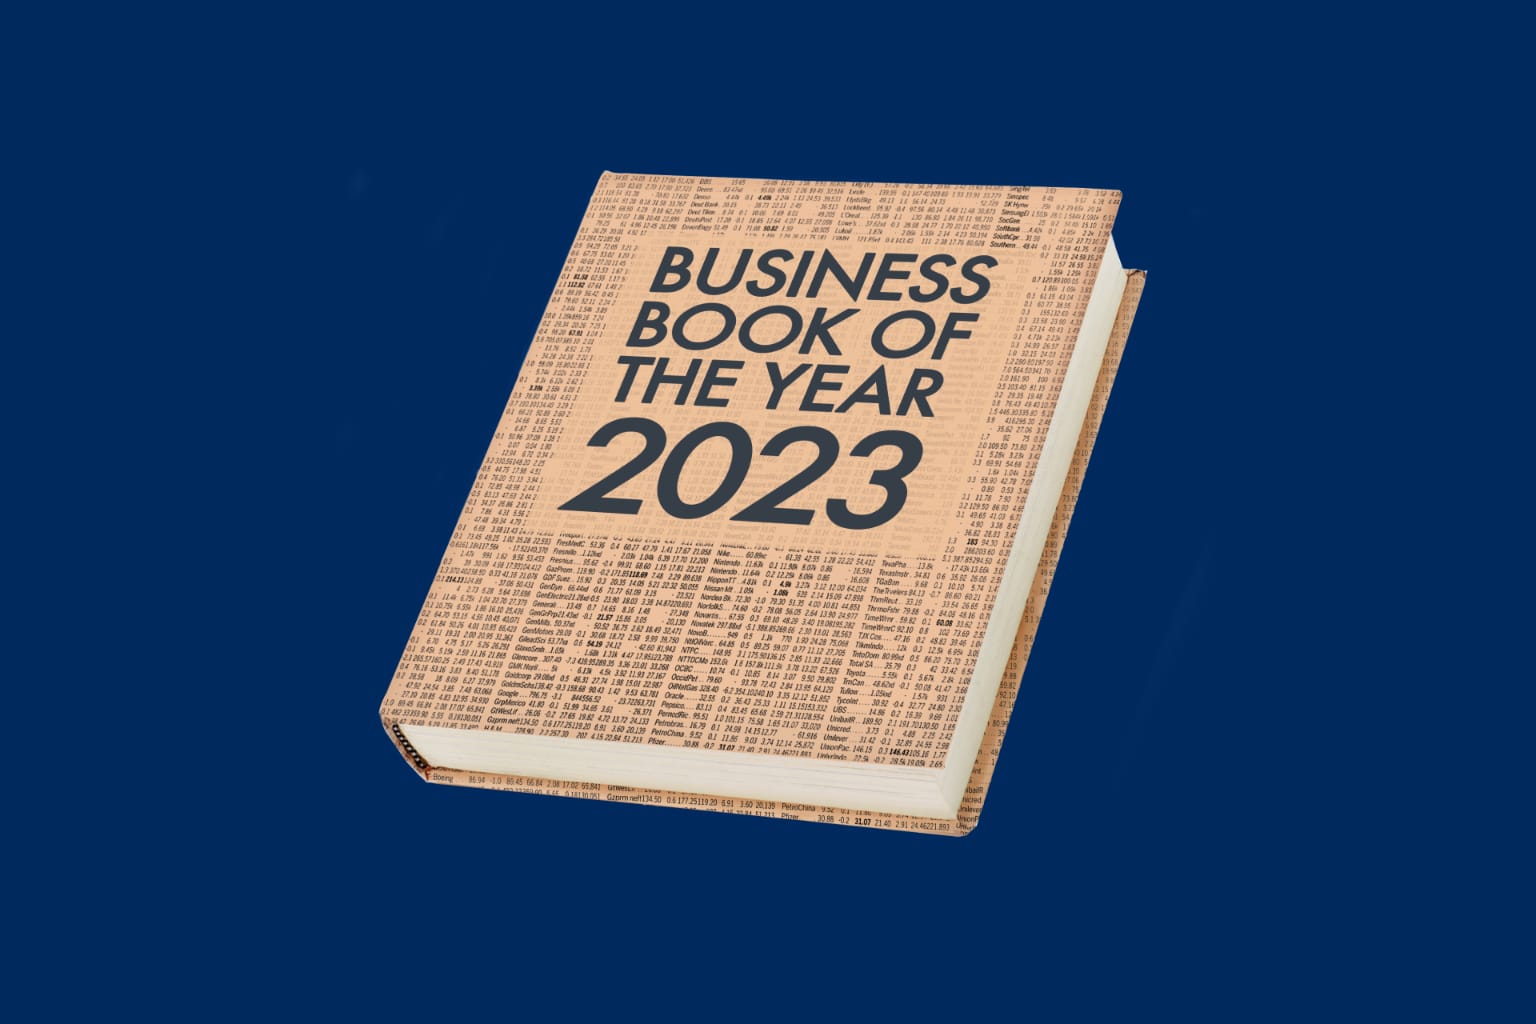 Business Book of the Year Award 2023 logo